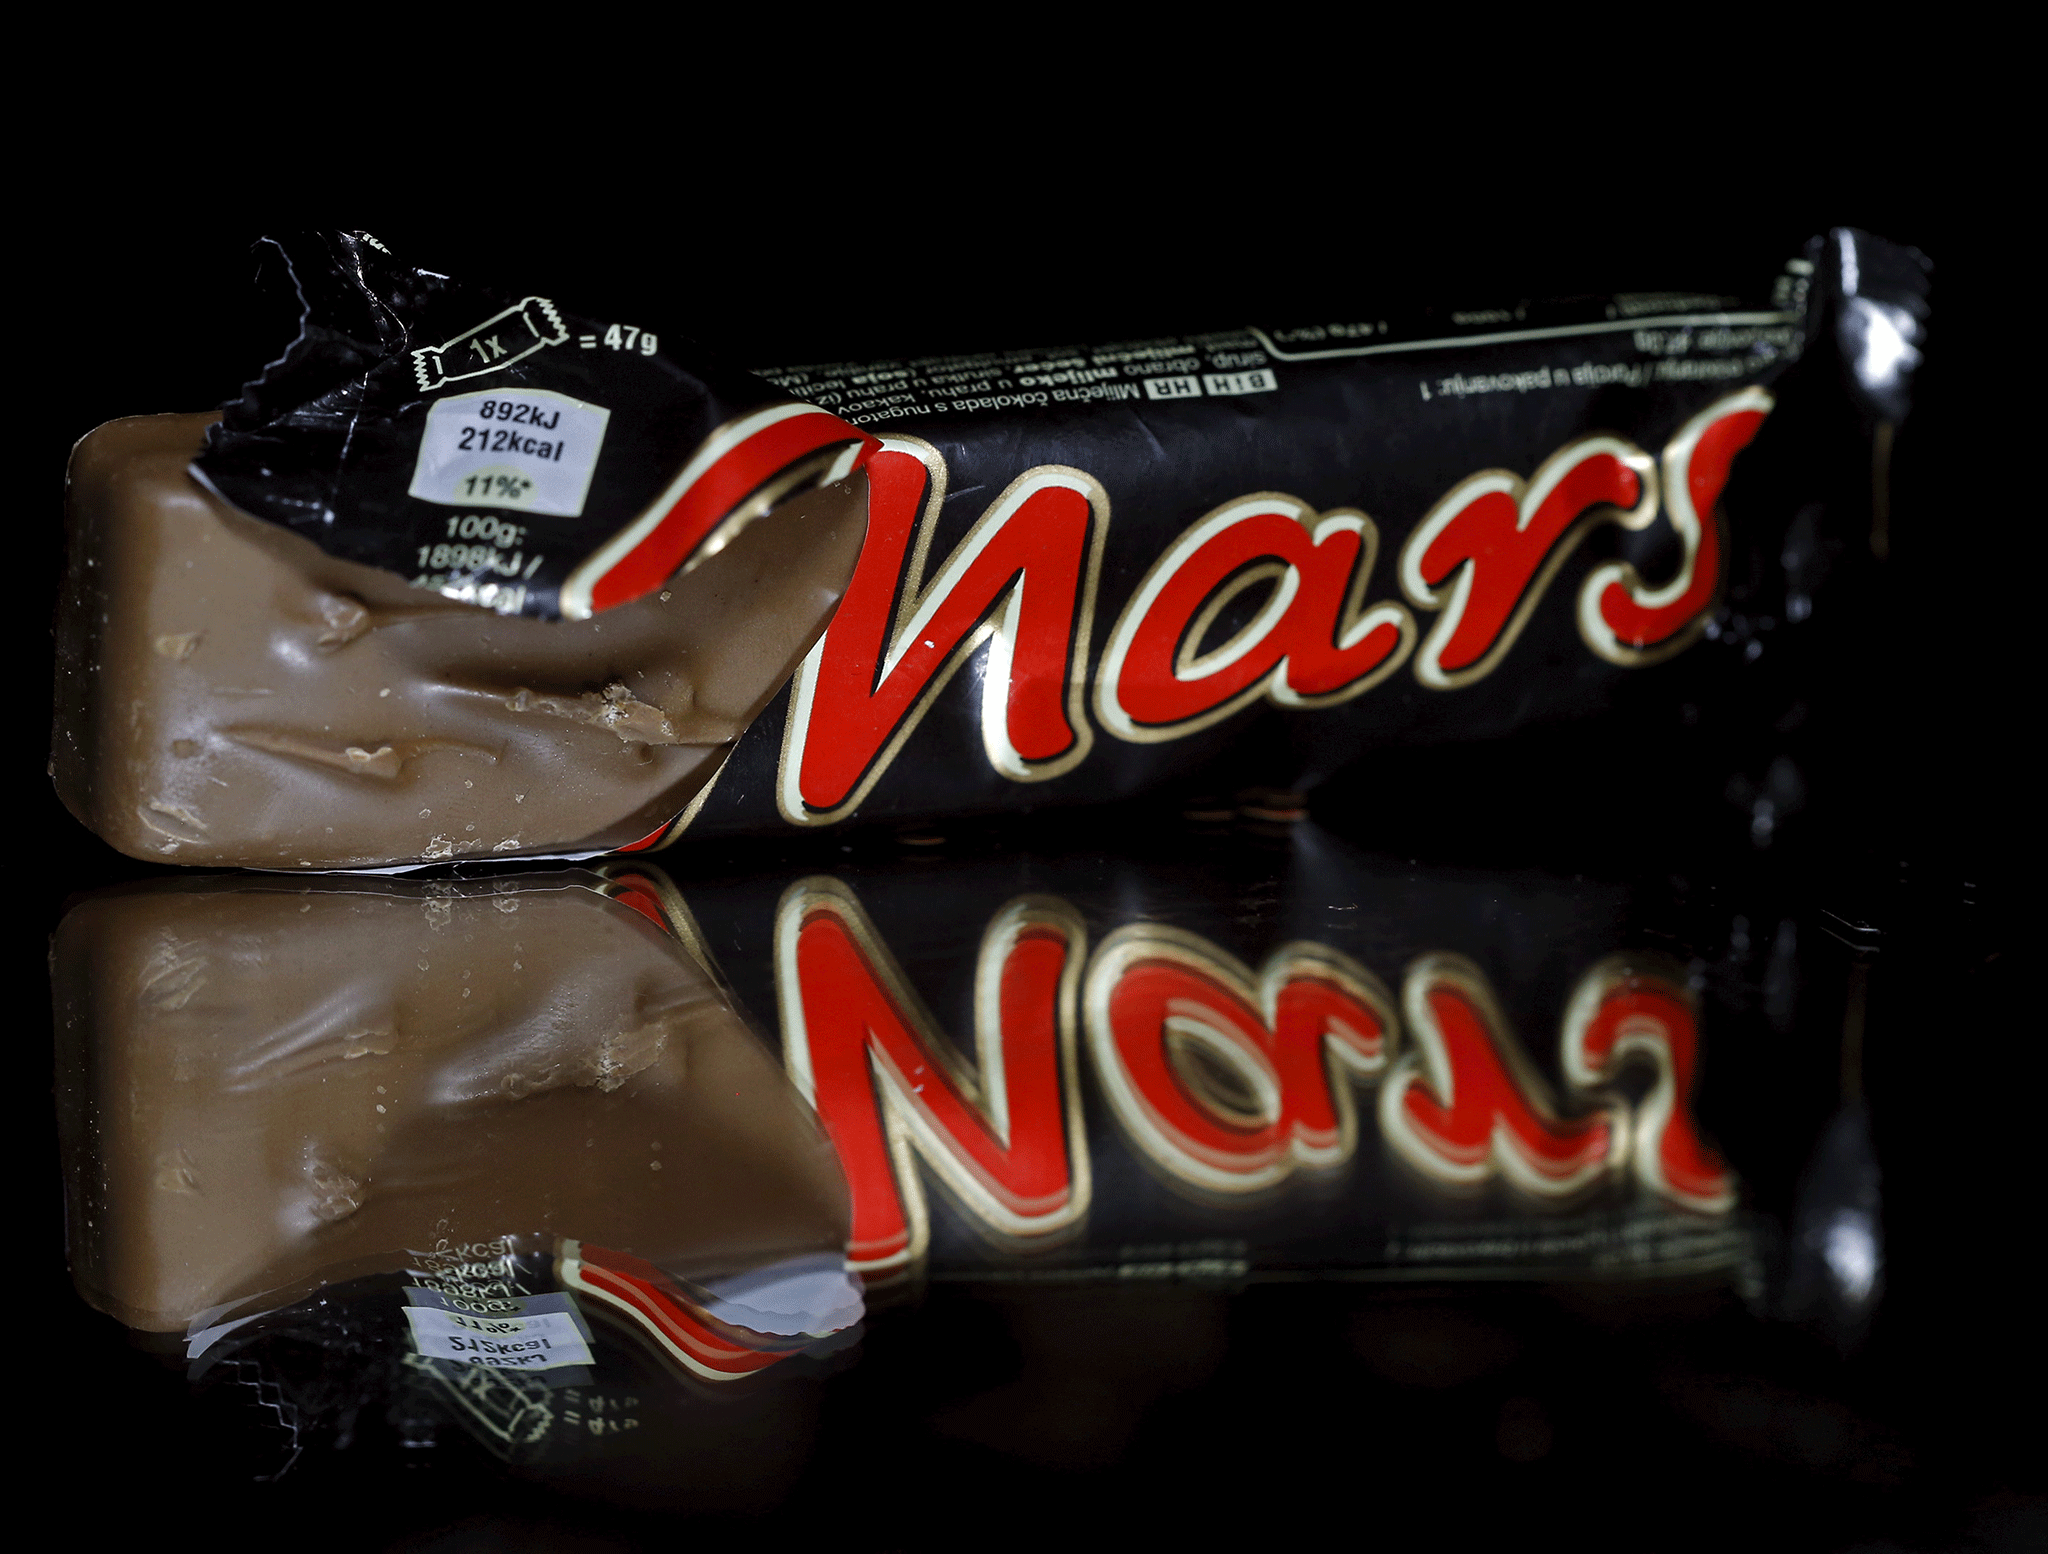 Mars bars face sharp price hikes after Brexit